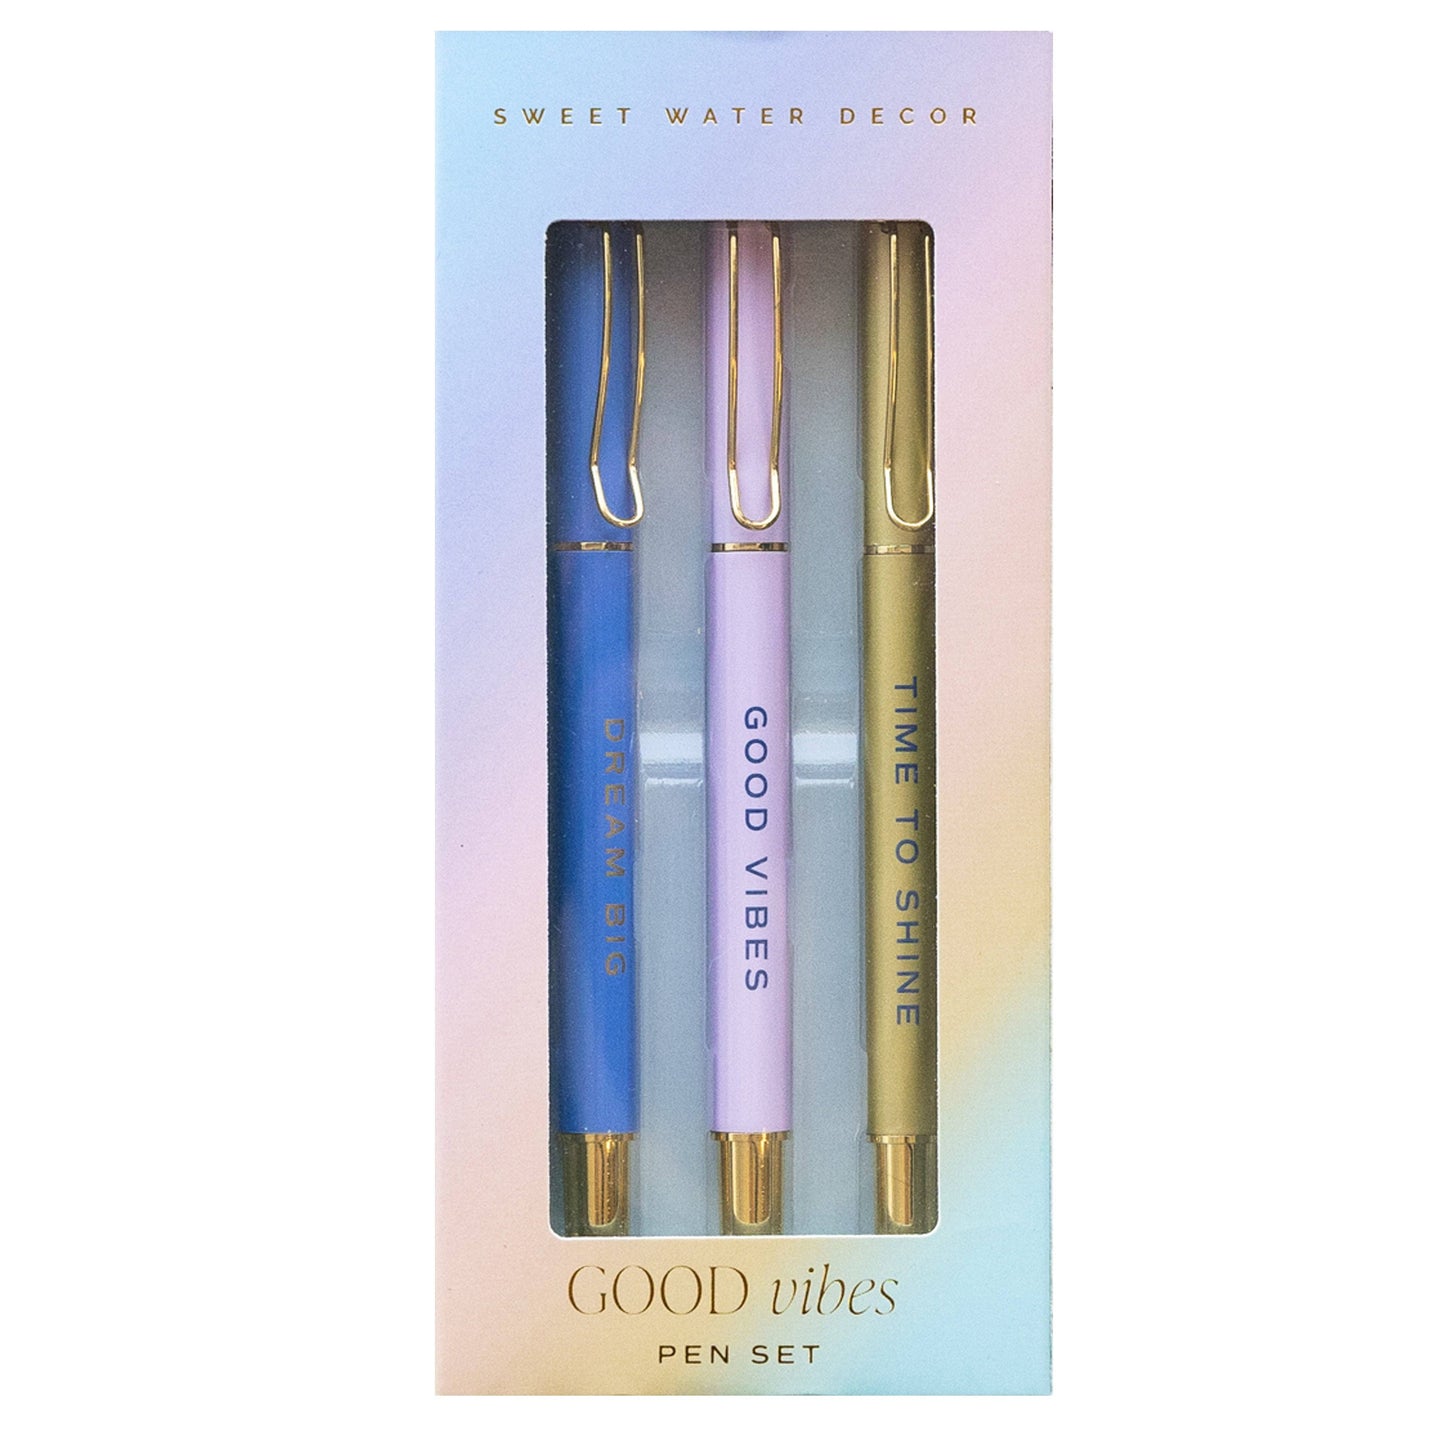 Sweet Water Decor - *NEW* Good Vibes Metal Pen Set - Home Decor & Gifts